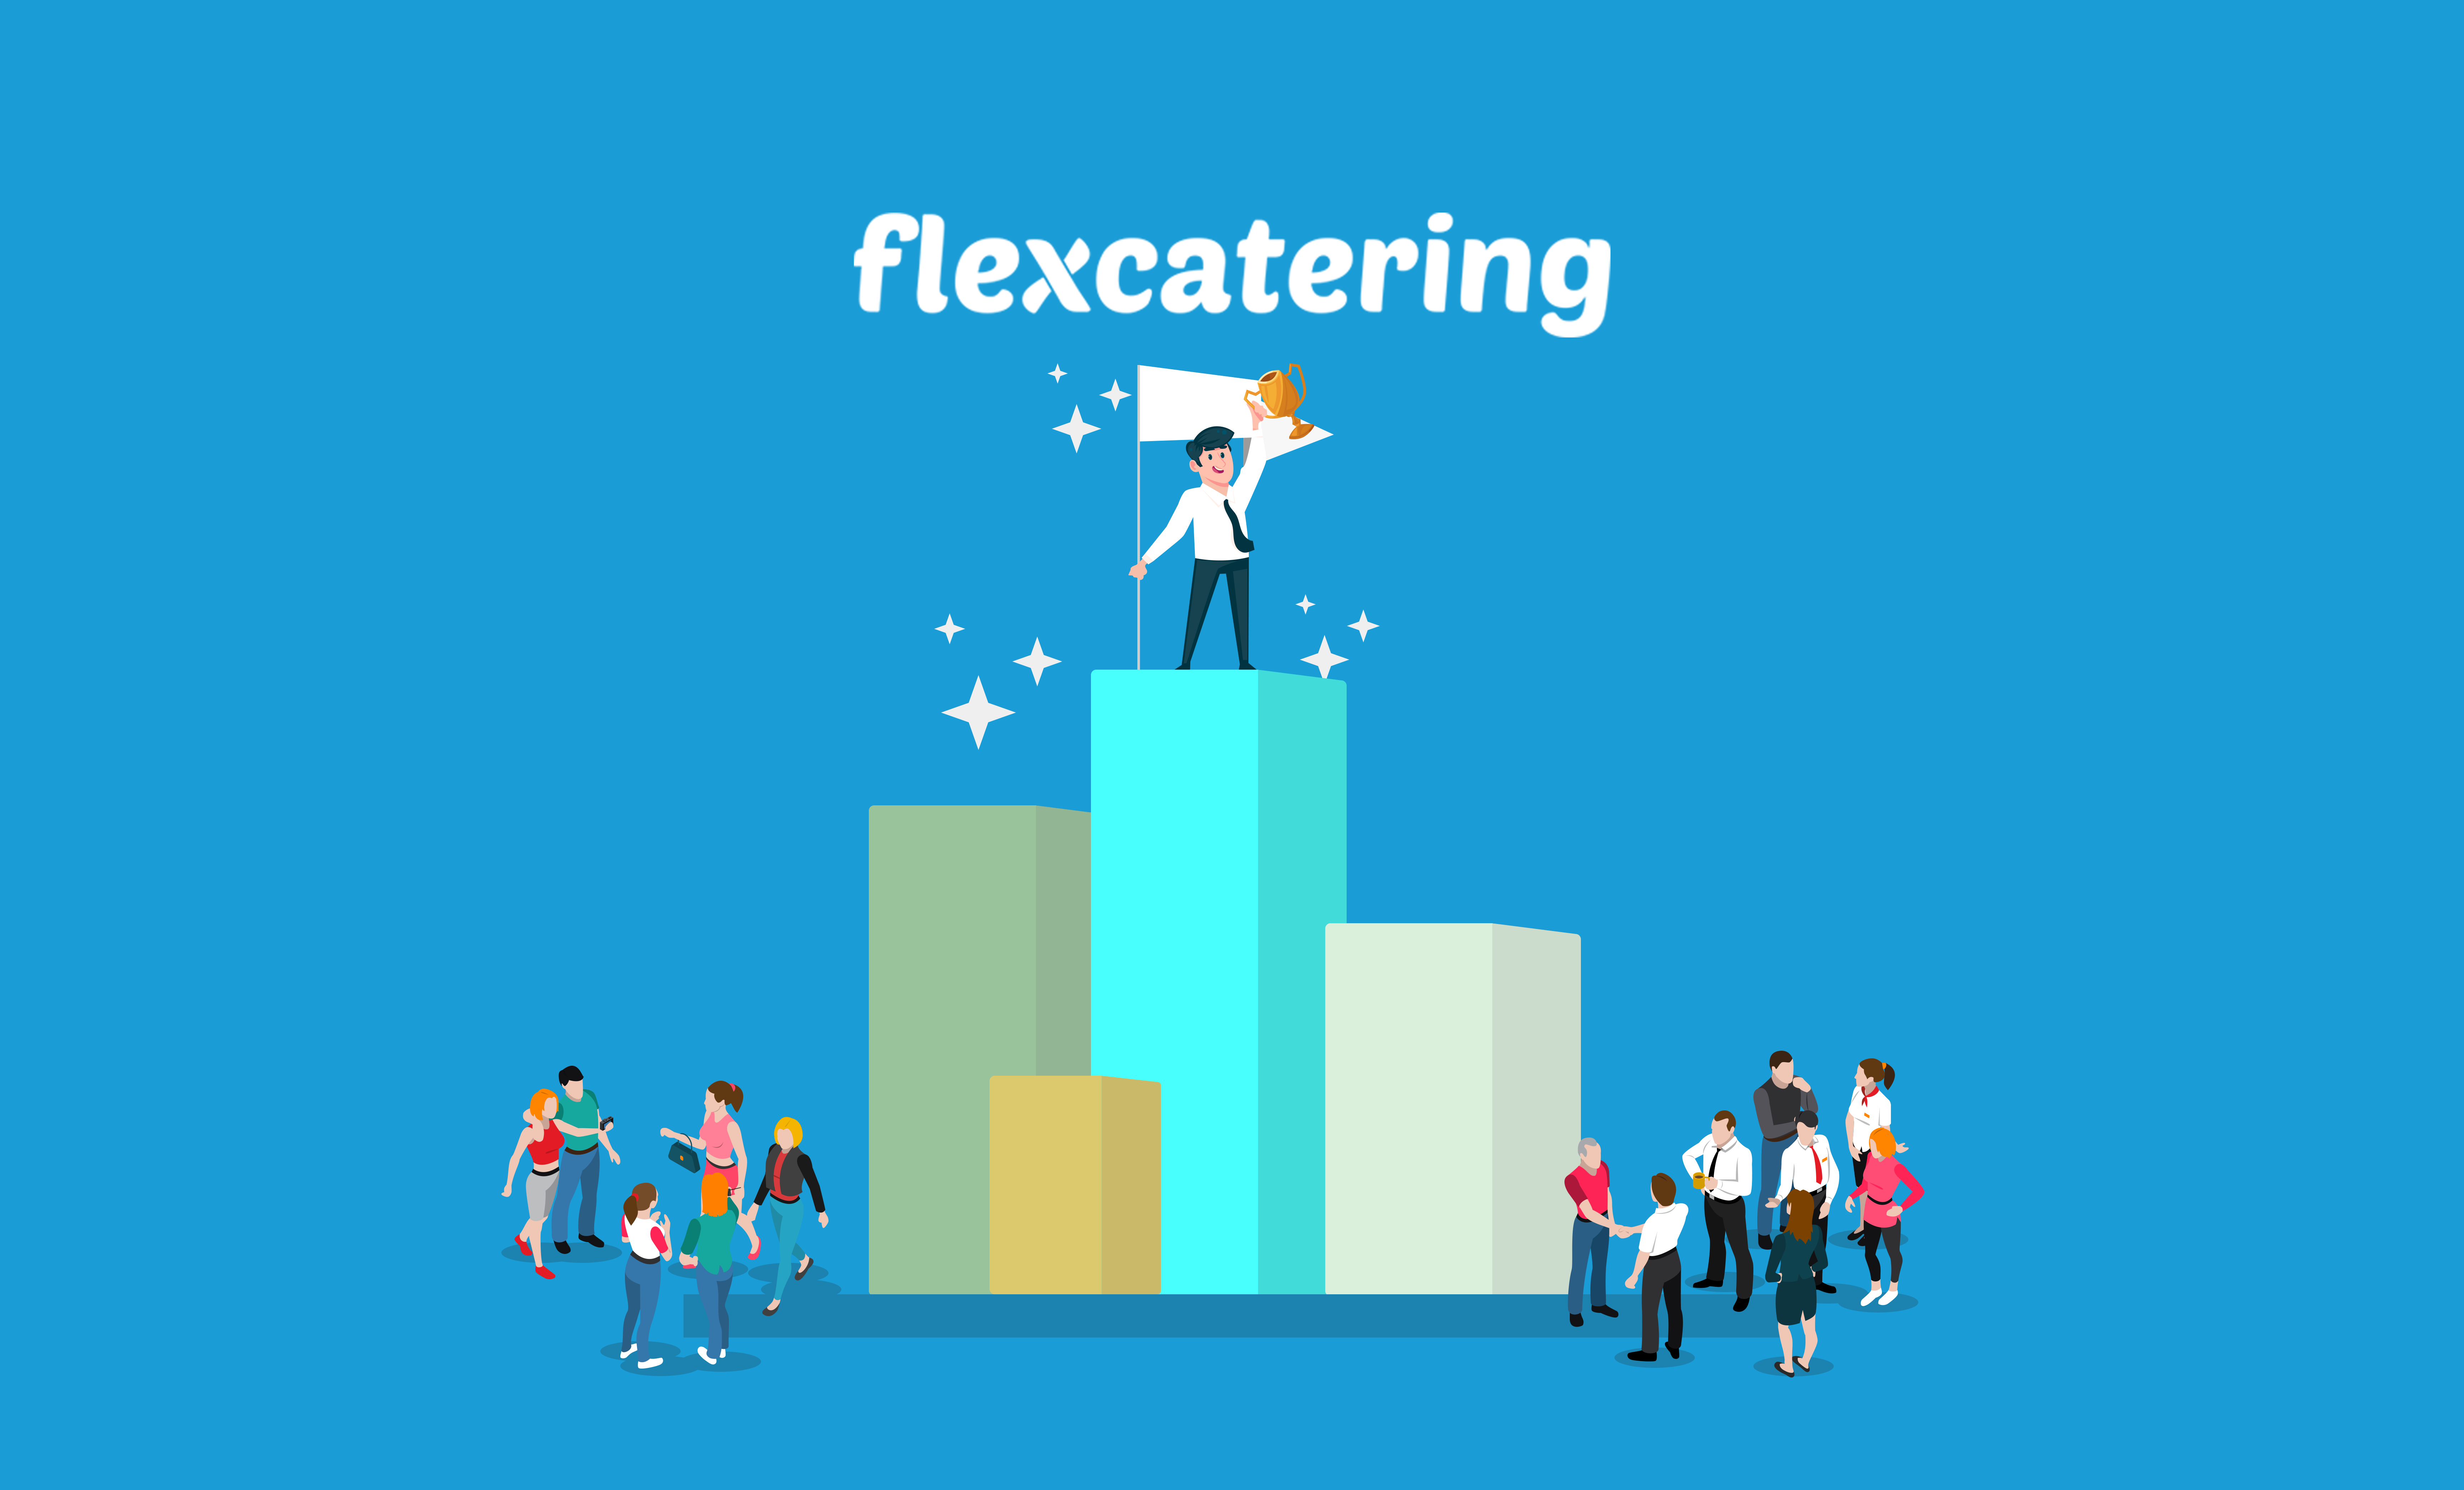 How Flex Catering is different